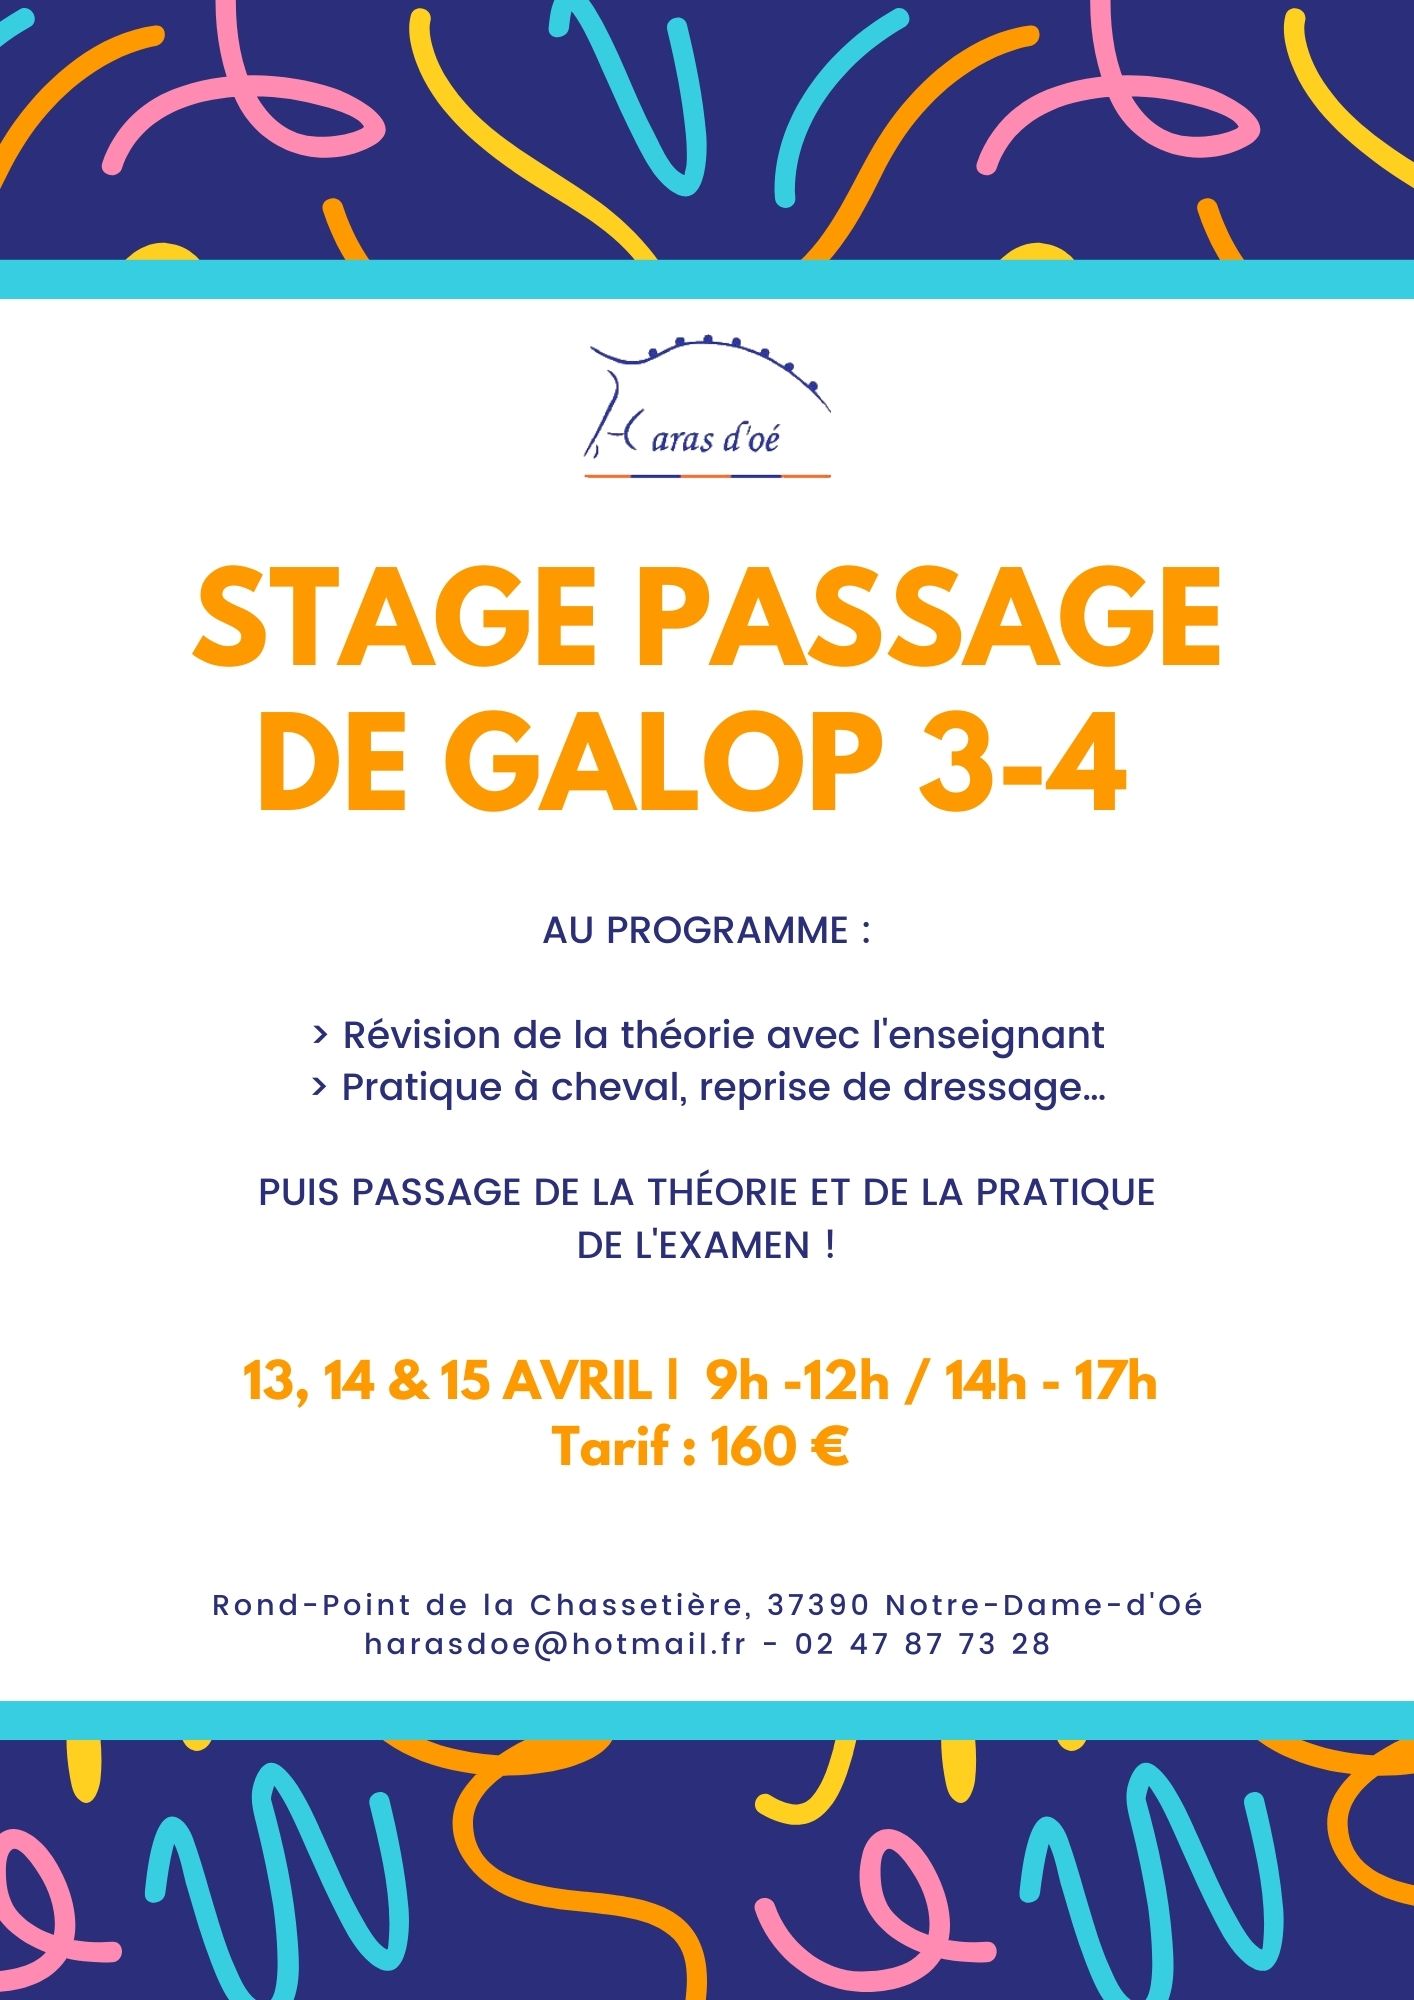 STAGE 13, 14 & 15 AVRIL